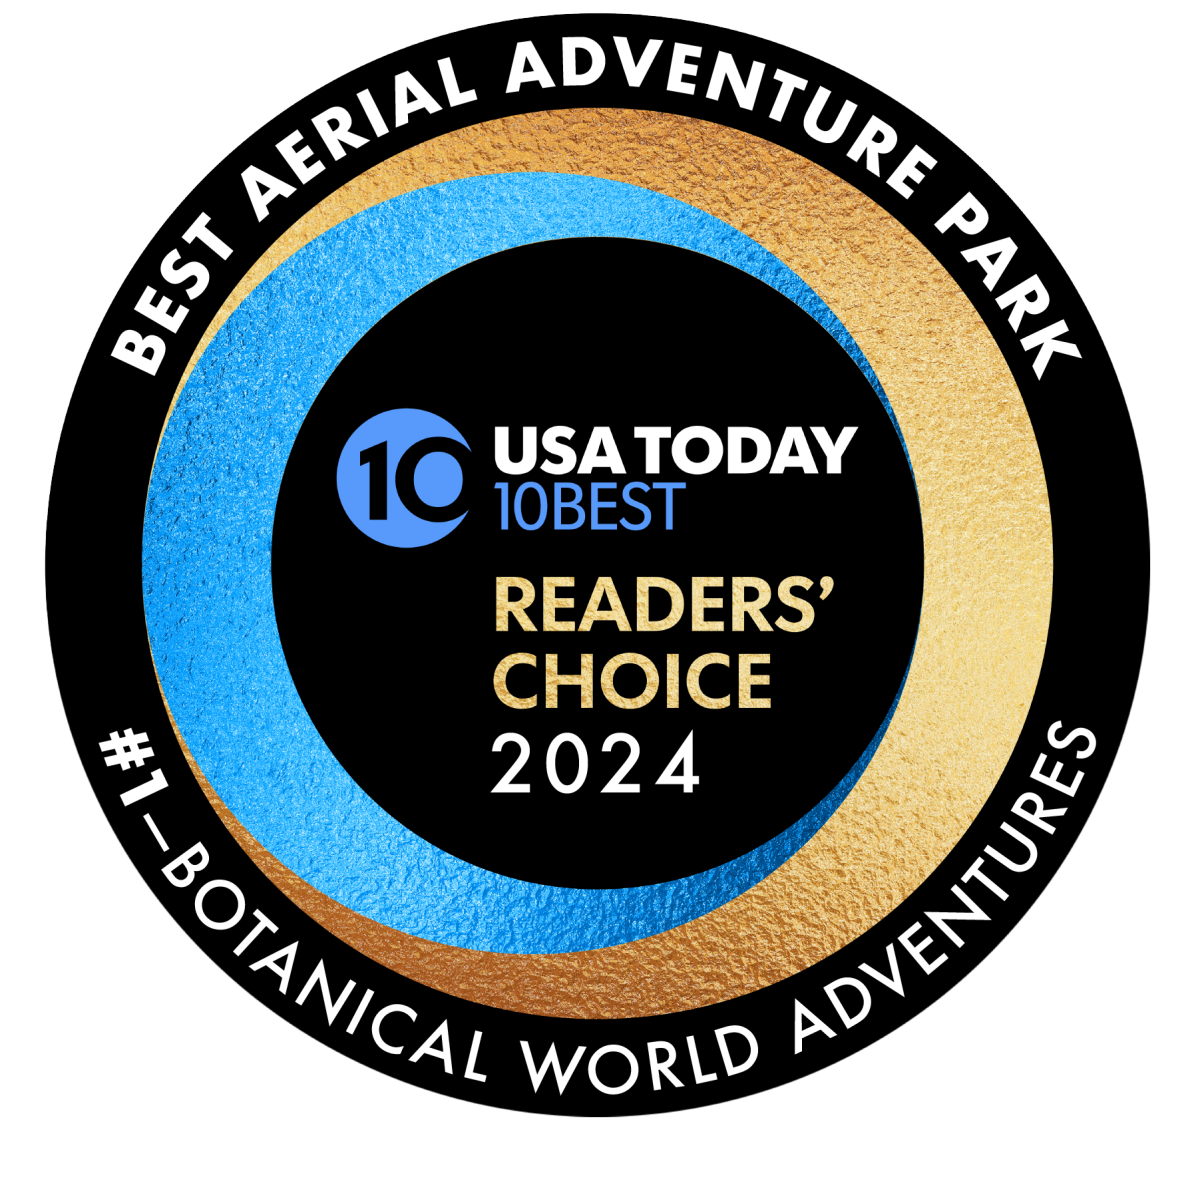 Botanical World Adventures was just Voted Best Aerial Adventure Park by USA Today!